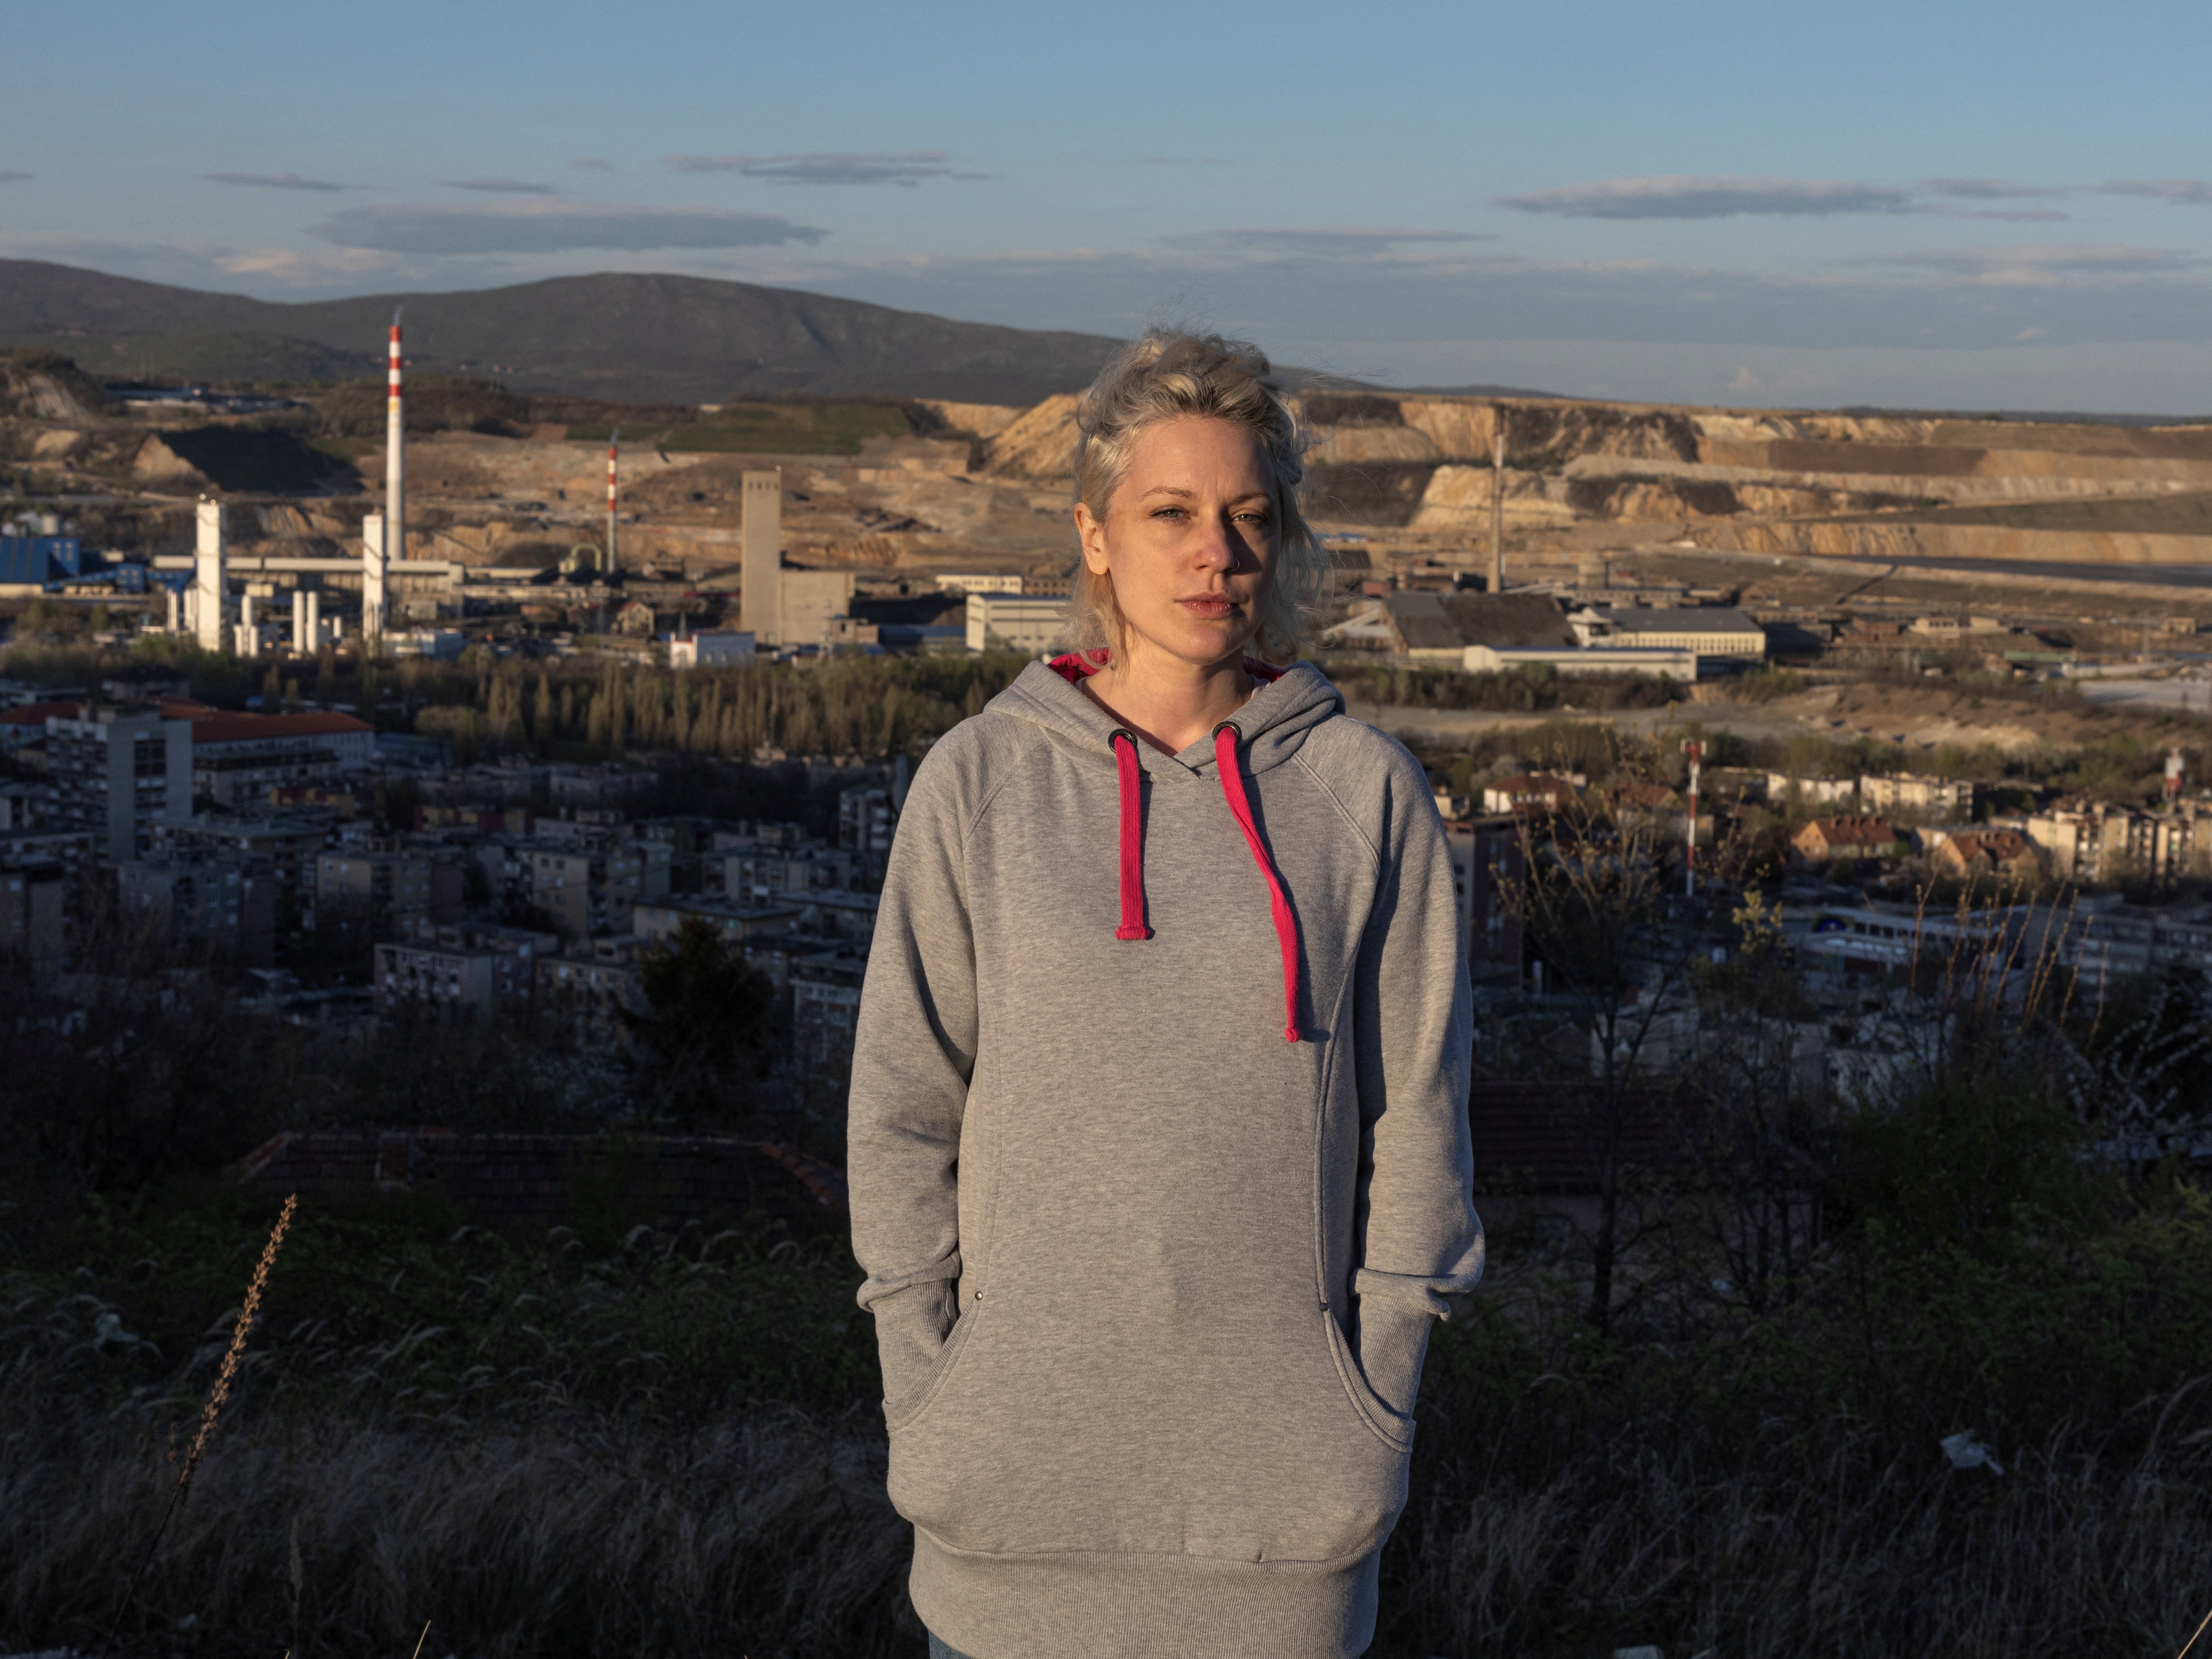 Deana Jovanovic, 40: ‘I expect that the heroines of the village will get what they are fighting for: systematic support from the government and the Zijin company which could provide them life with dignity. I hope they will be able to plan their future together’